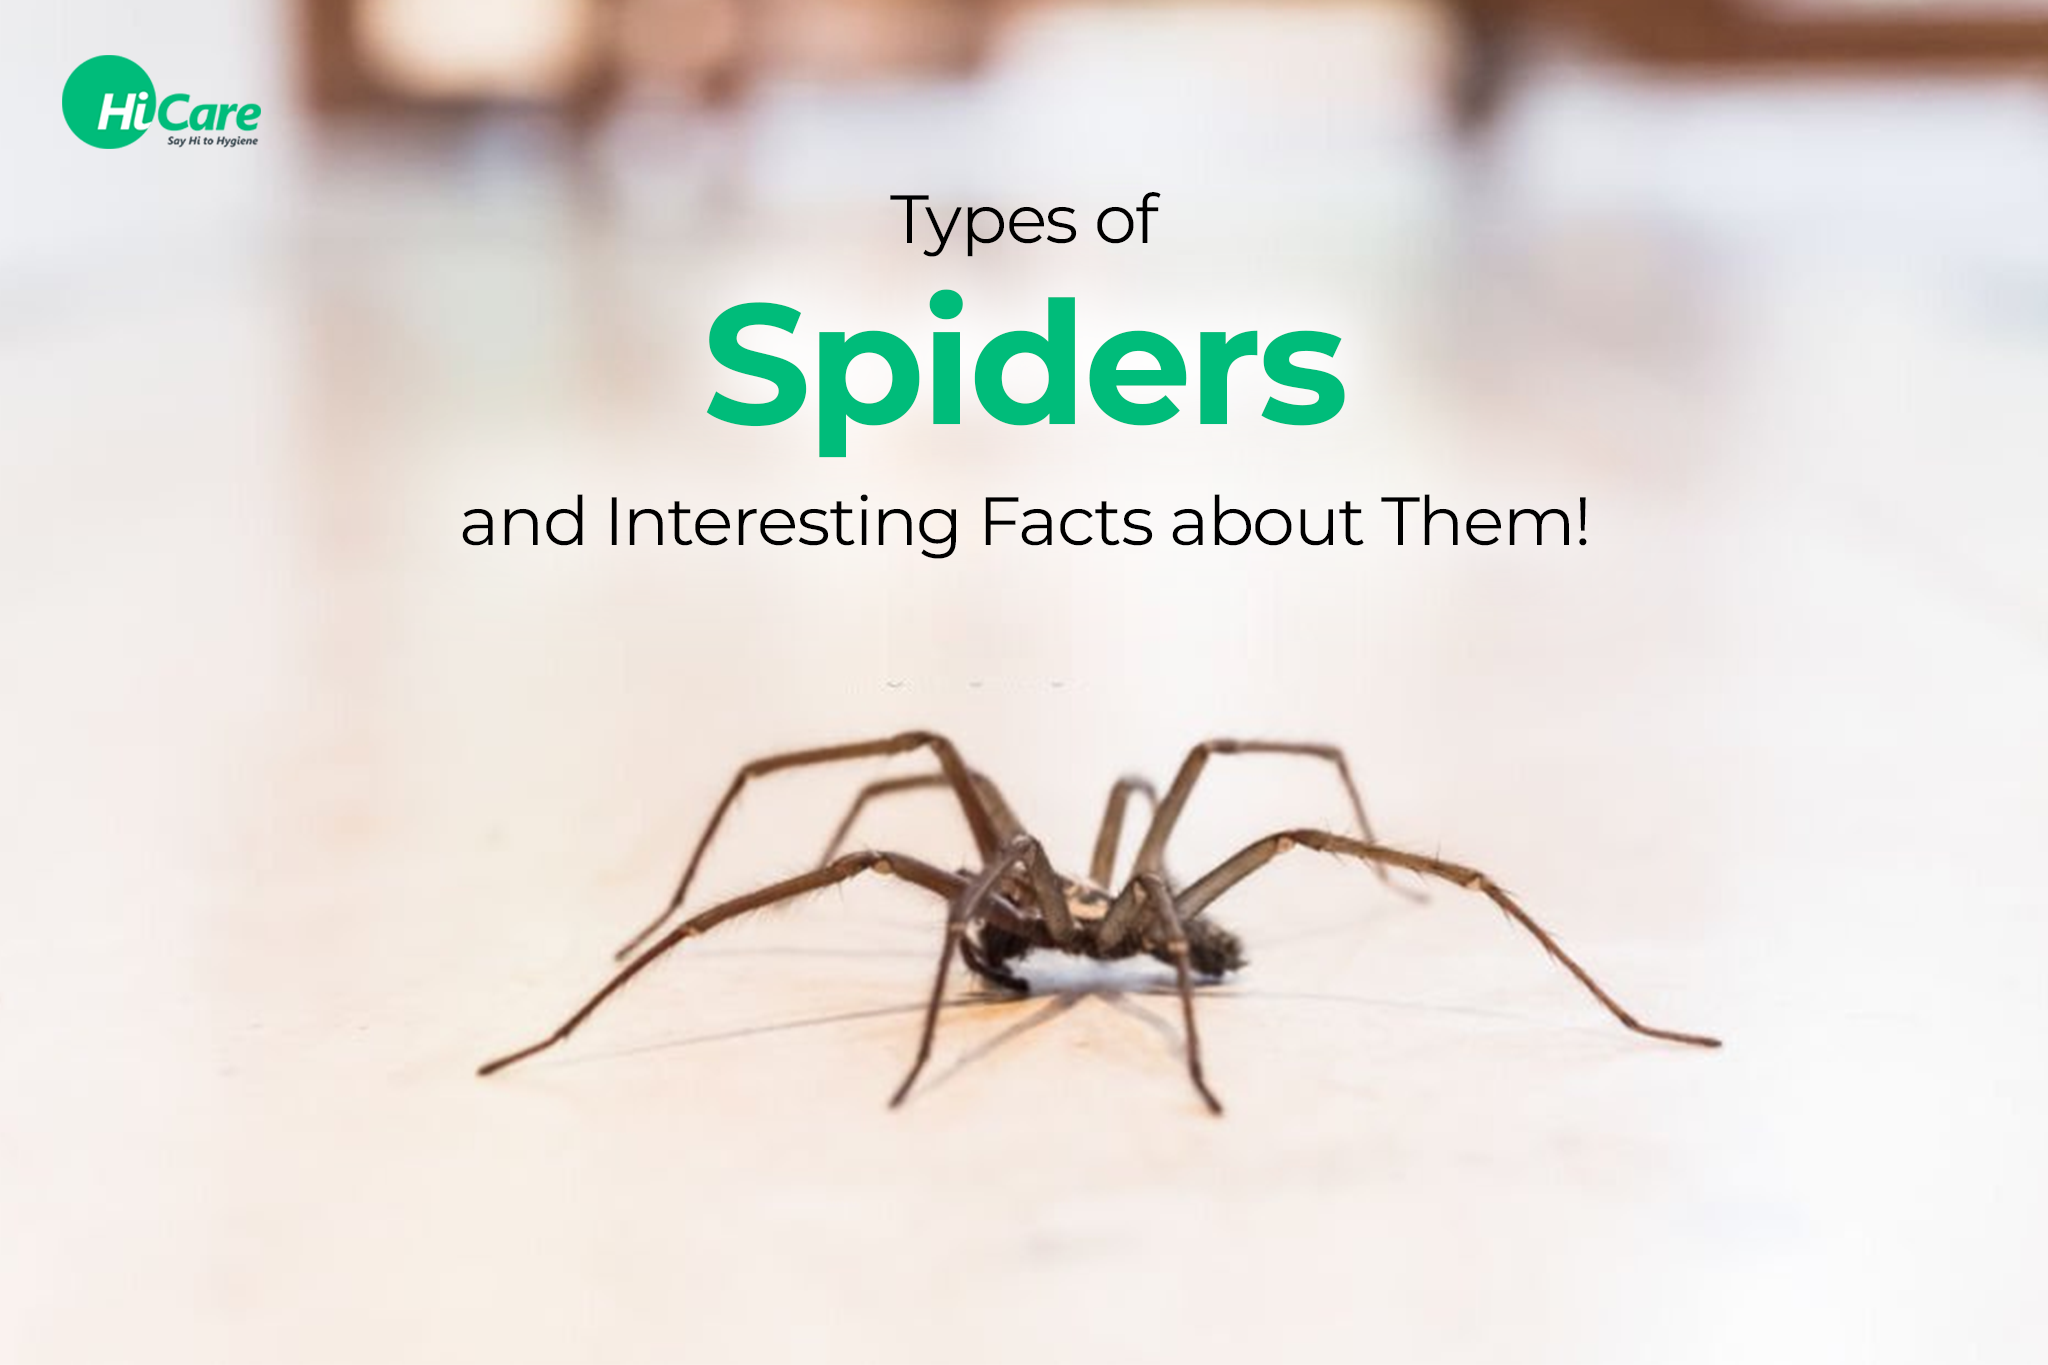 Types of Spiders and Interesting Facts about Them!